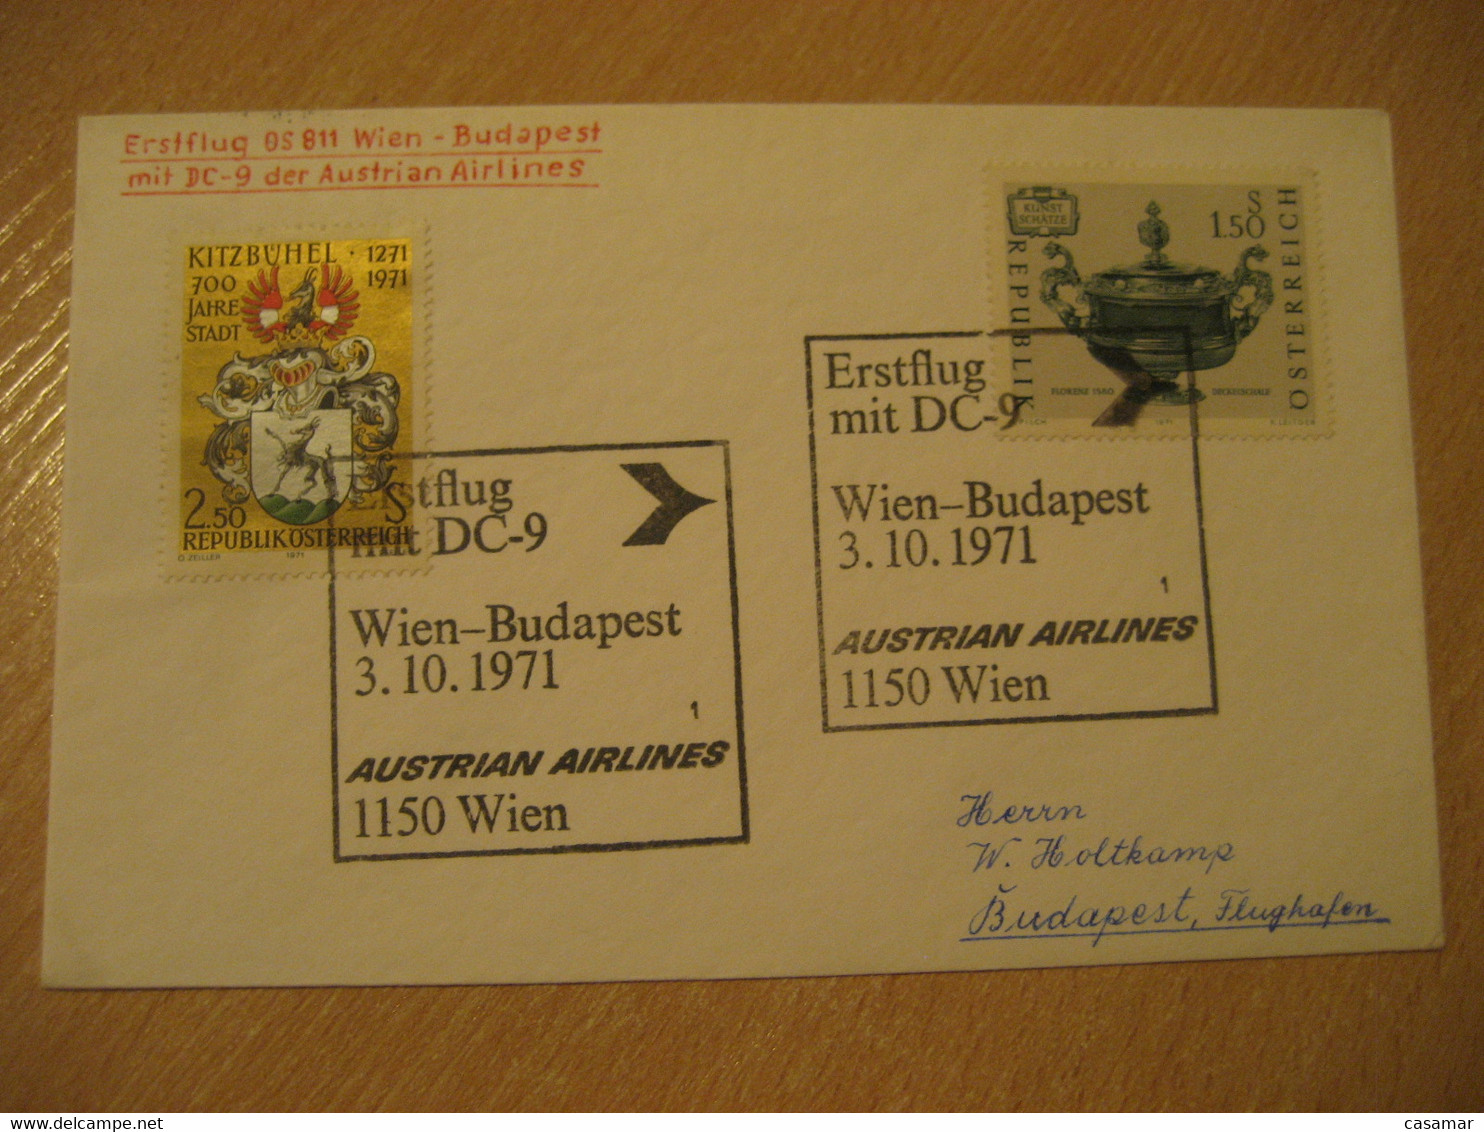 BUDAPEST Wien 1971 AUA Austrian Airlines Airline DC-9 First Flight Cancel Cover HUNGARY AUSTRIA - Covers & Documents